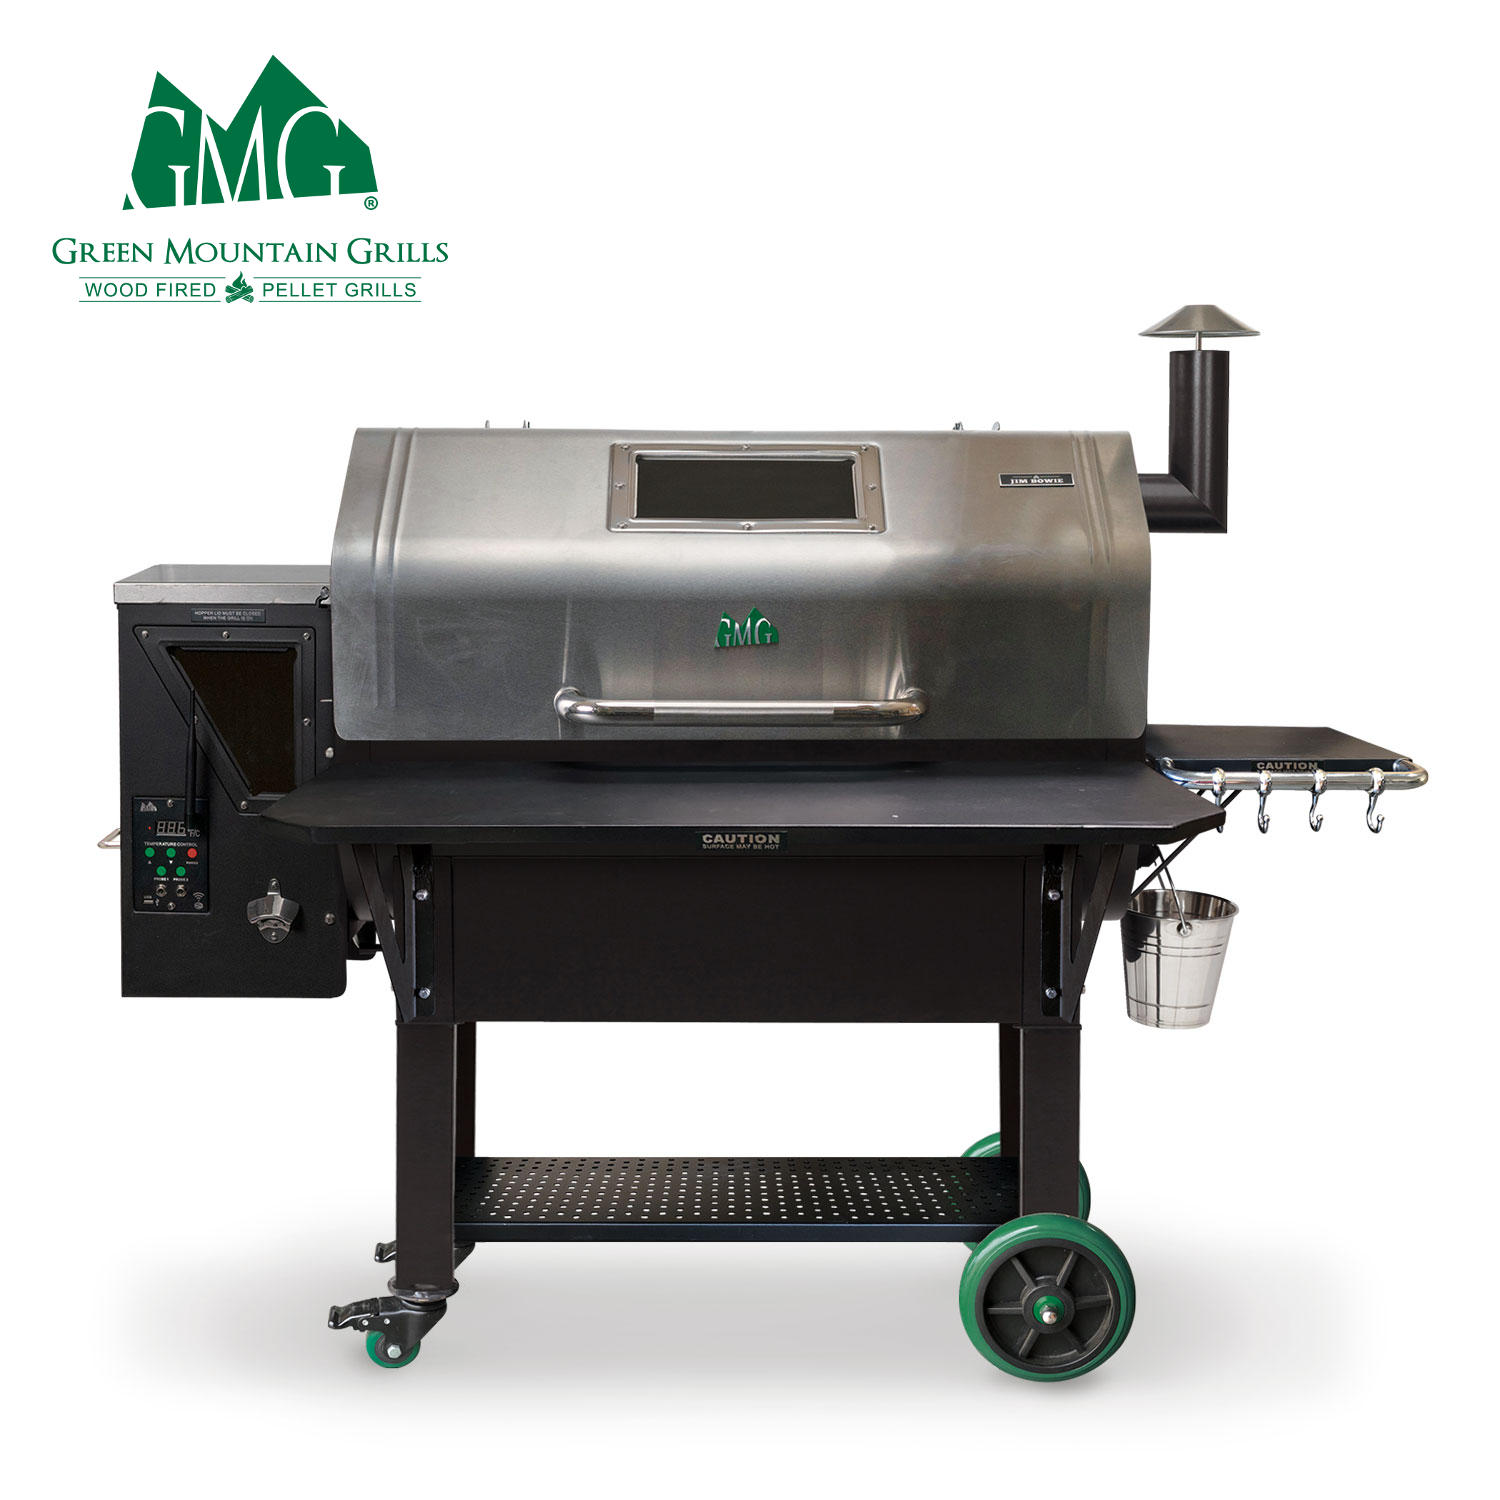 Green Mountain Grills Wood Pellet Grill Jim Bowie Series